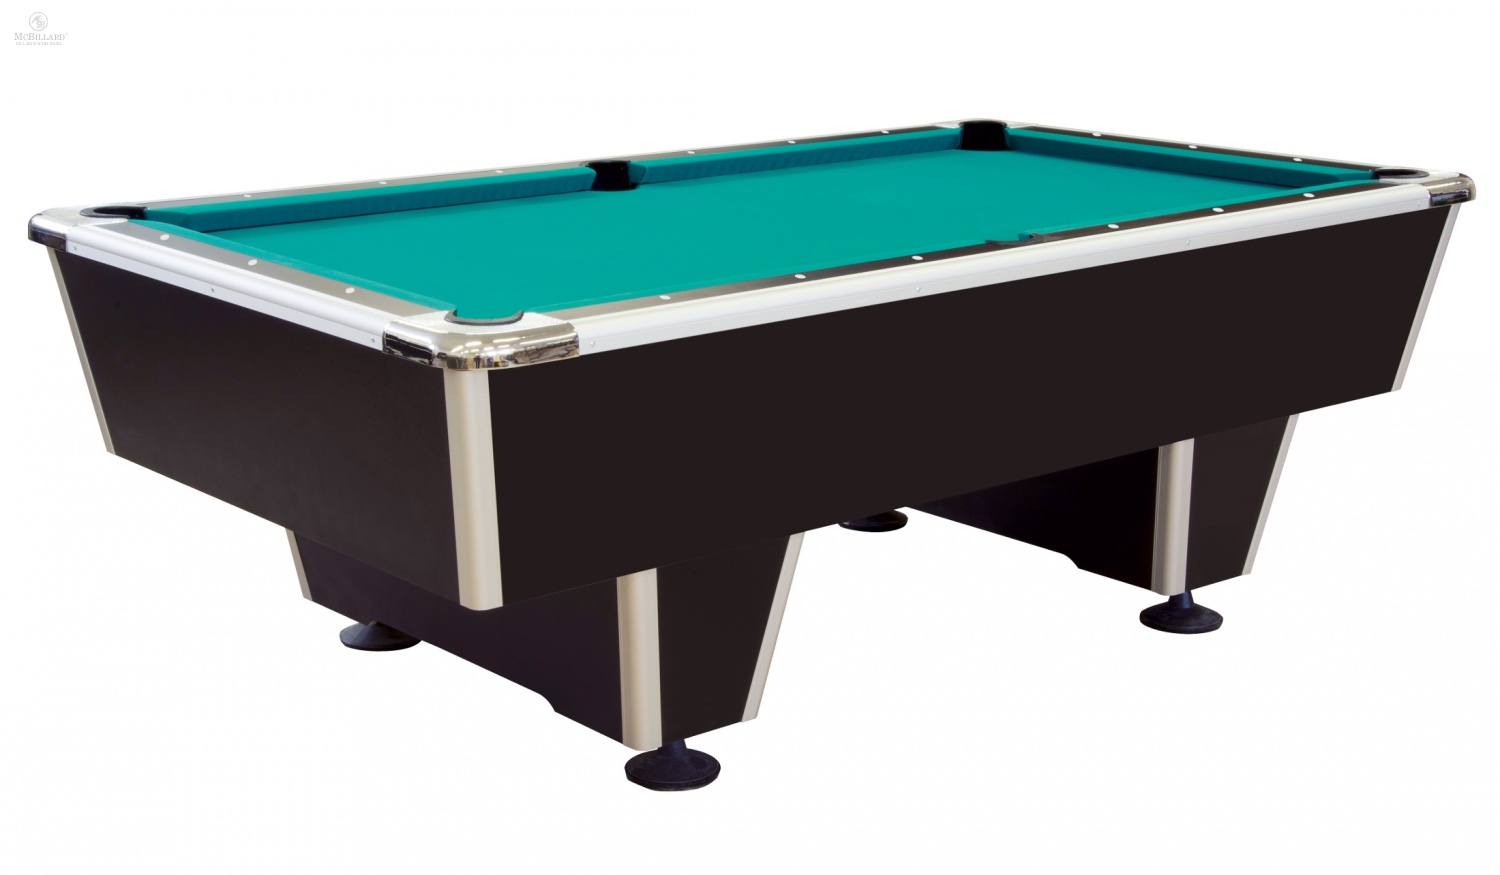 Pool Billiard Table - Orlando - without ball return, 7 ft.